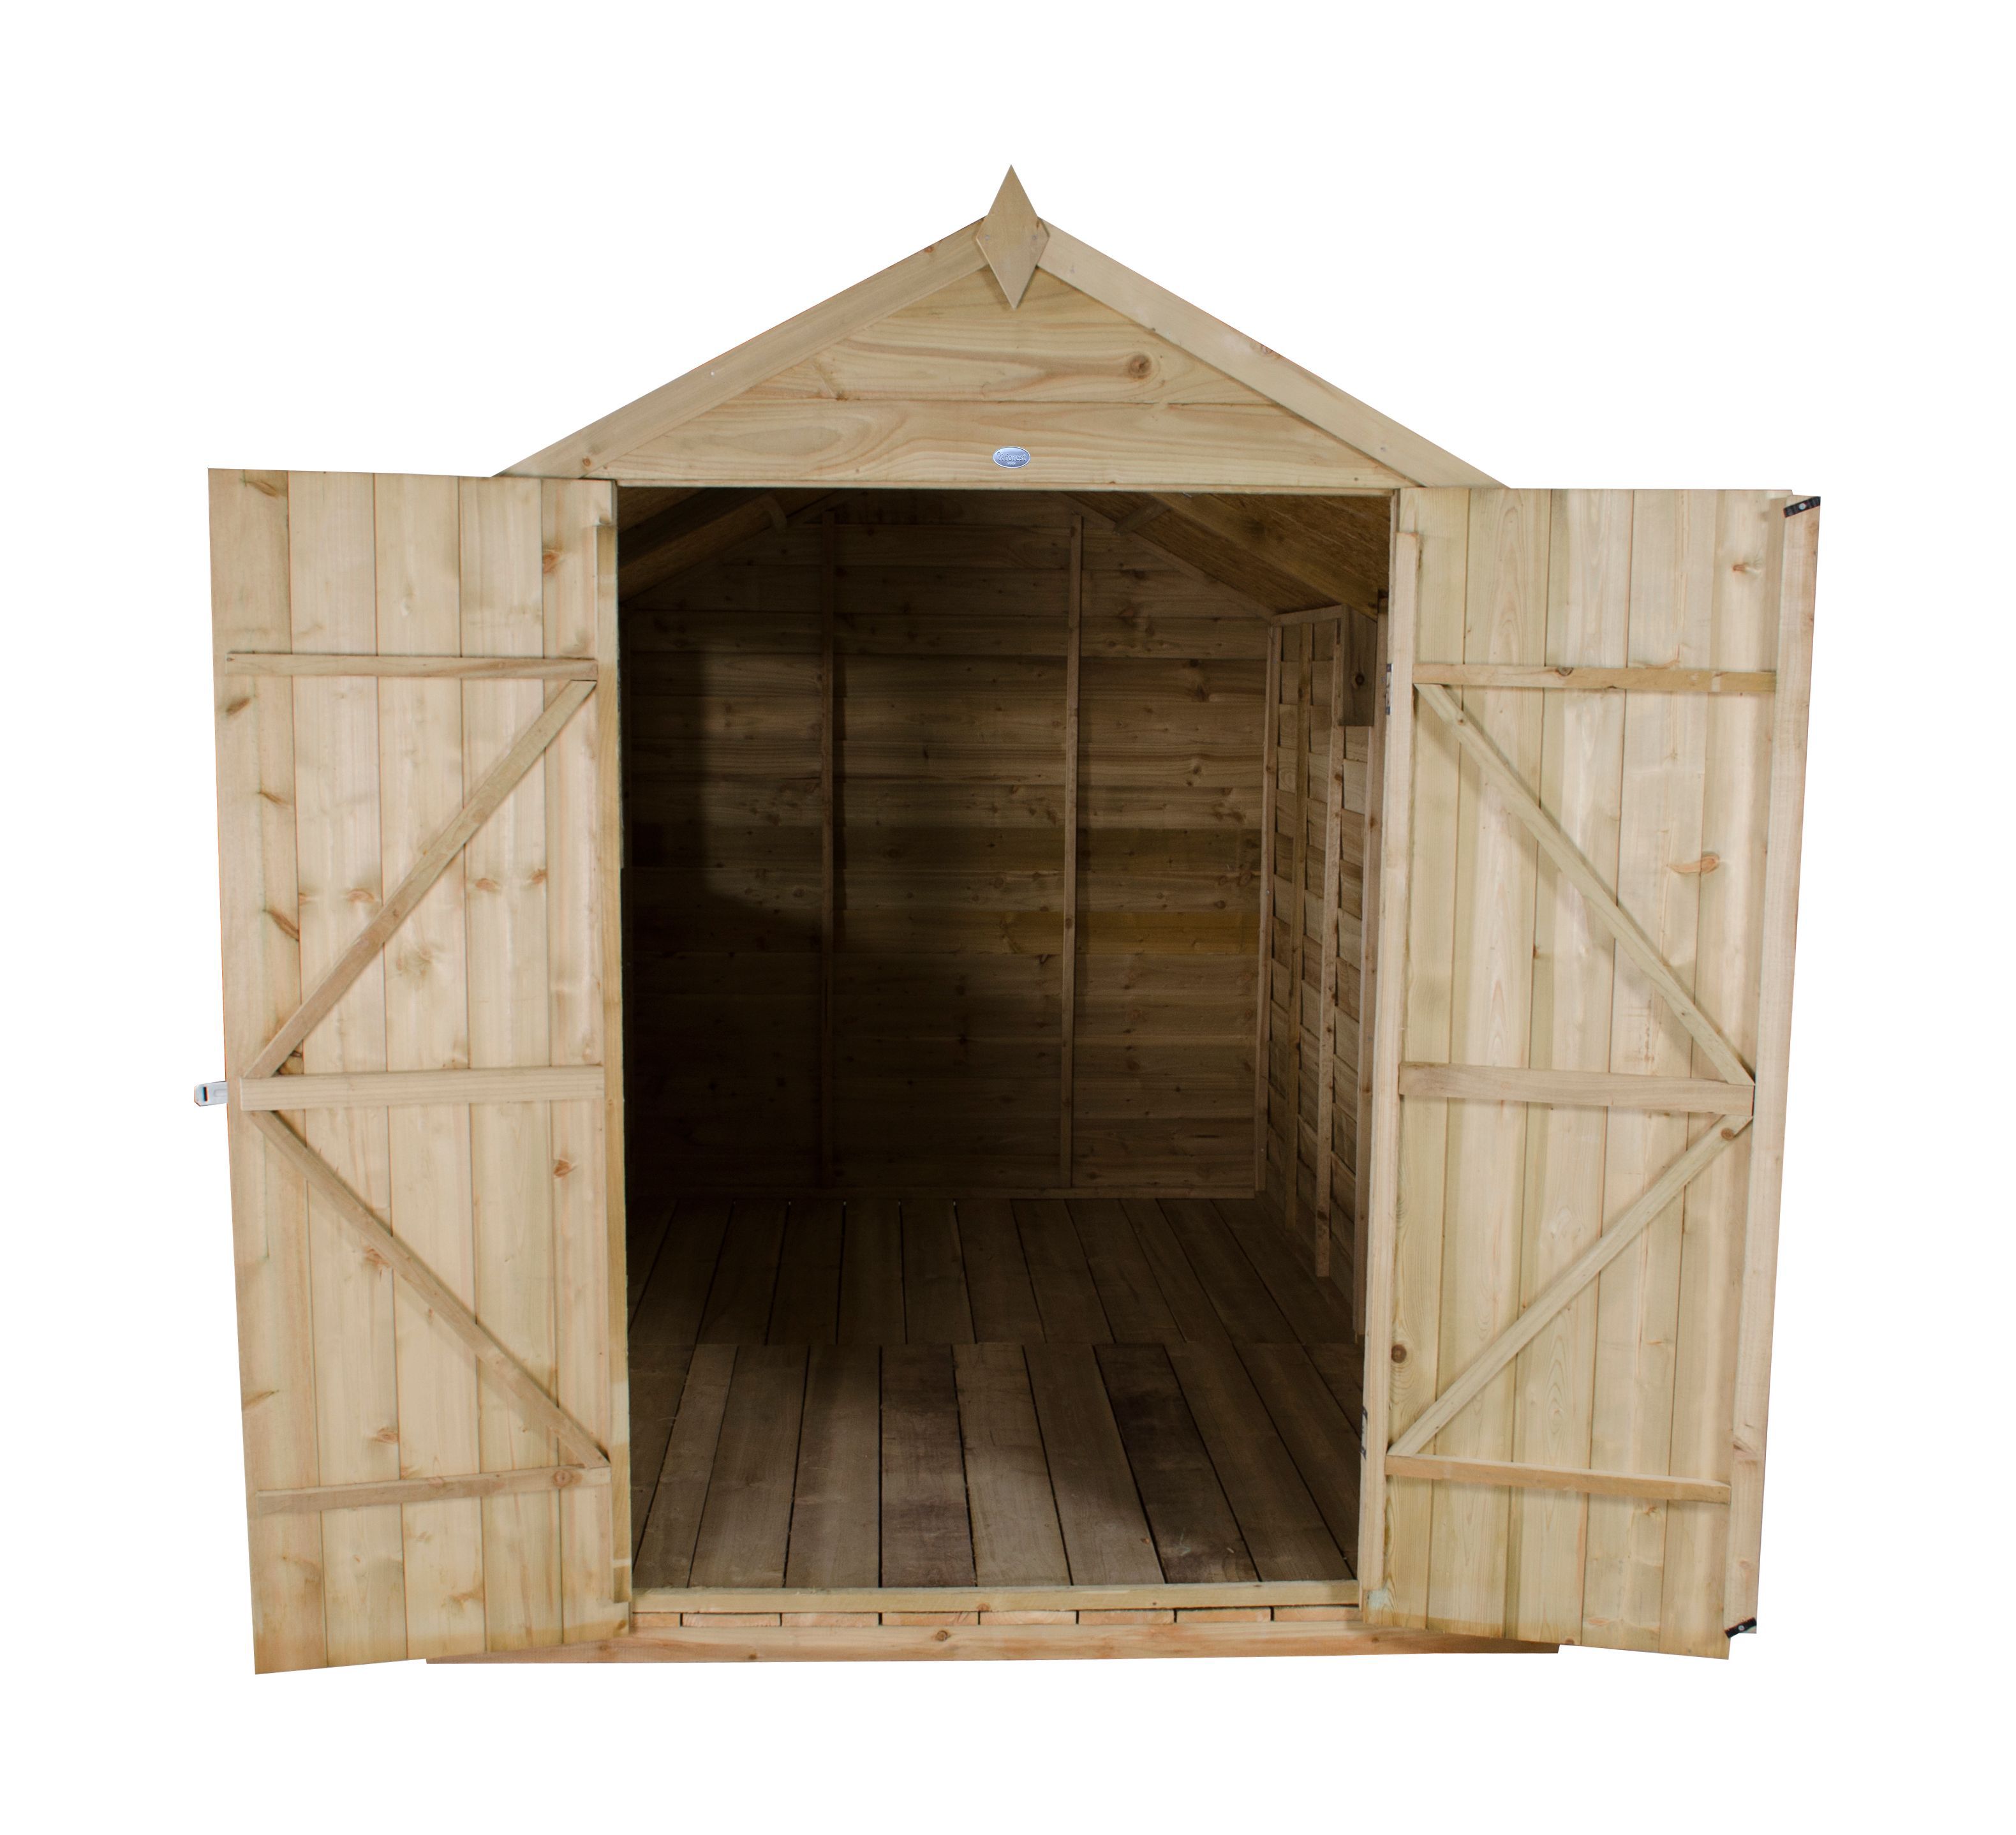 Forest Garden 10x6 Apex Overlap Wooden Shed